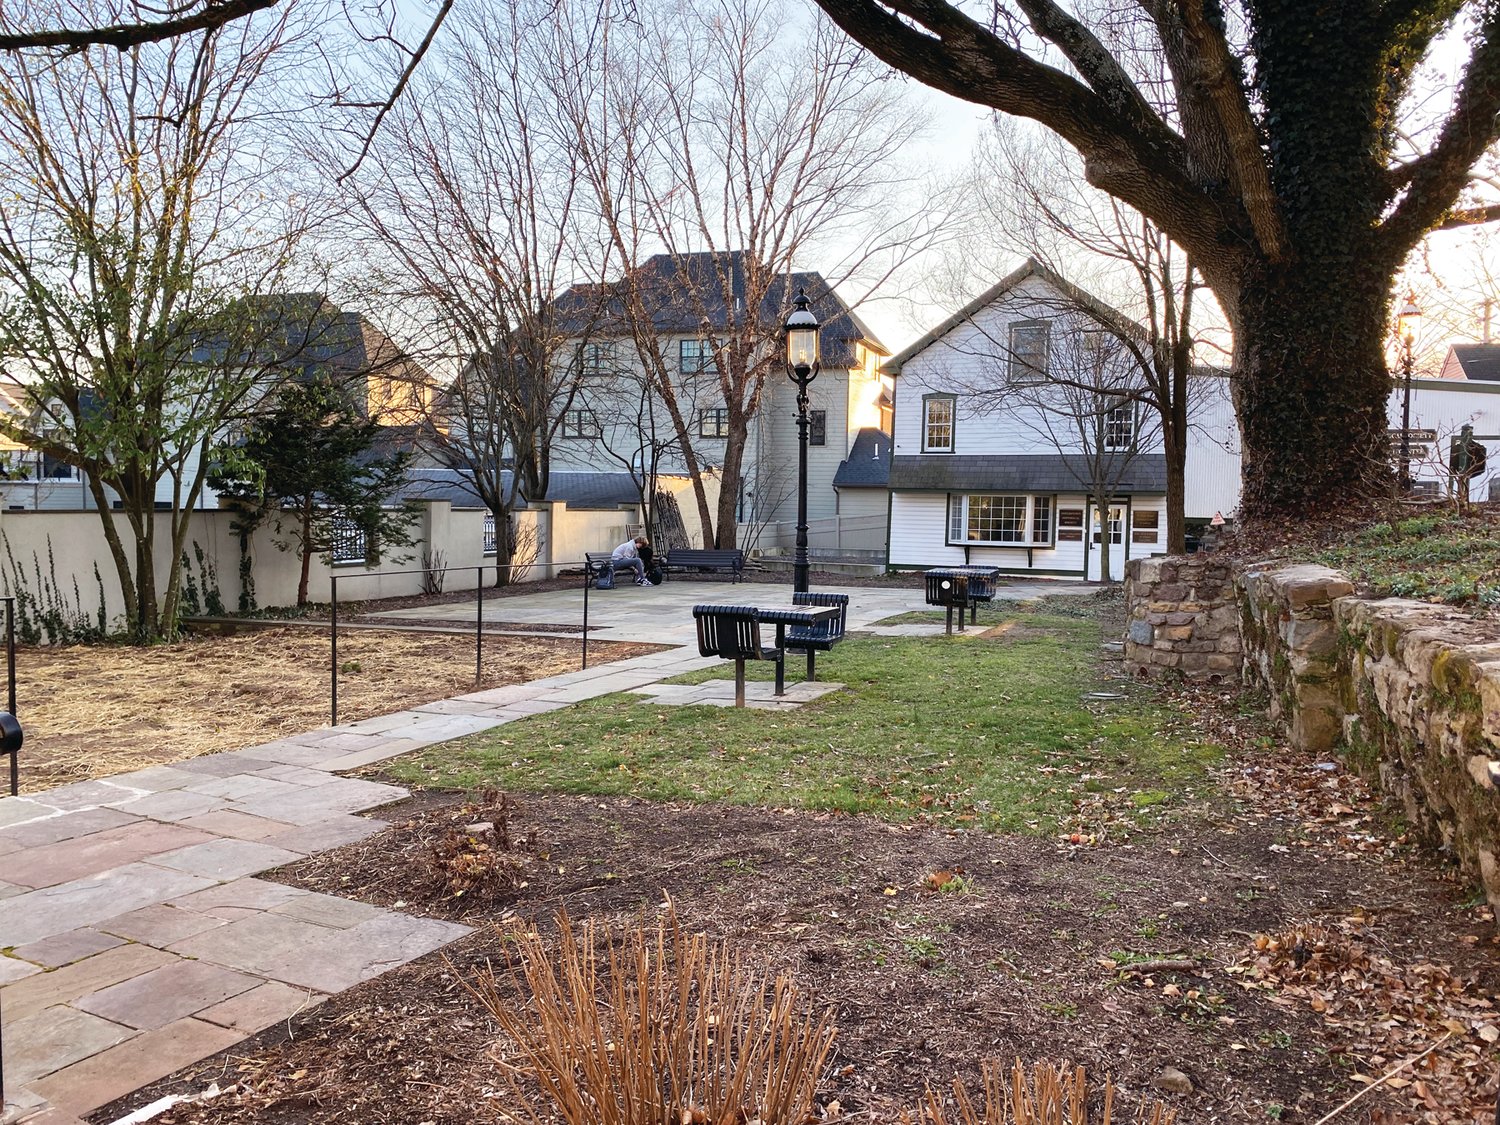 Additional benches and seating areas will make the pocket park tucked behind the Doylestown Historical Society more welcoming.